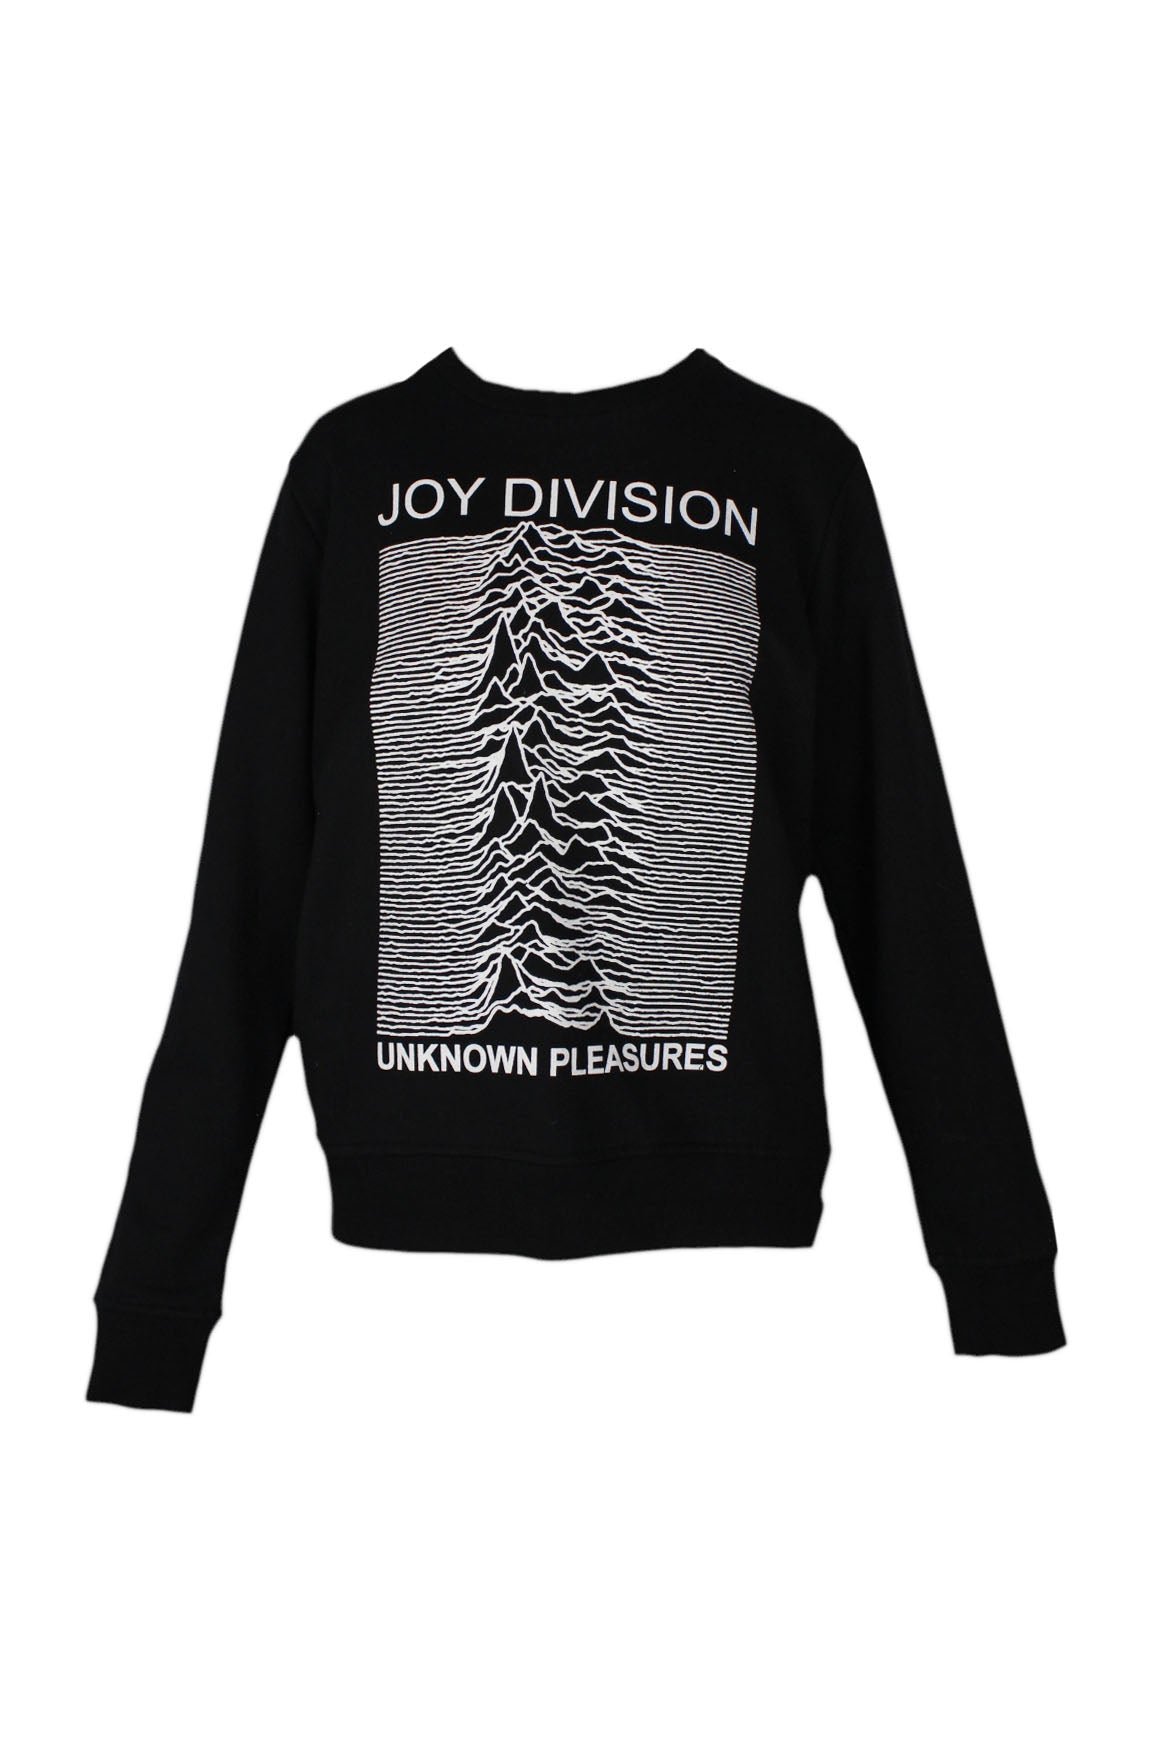 front of sandro black cotton blend long sleeve sweatshirt. features crew neckline, 'joy division unknown pleasures' print at front, ribbed trim, and pull on style; relaxed fit.